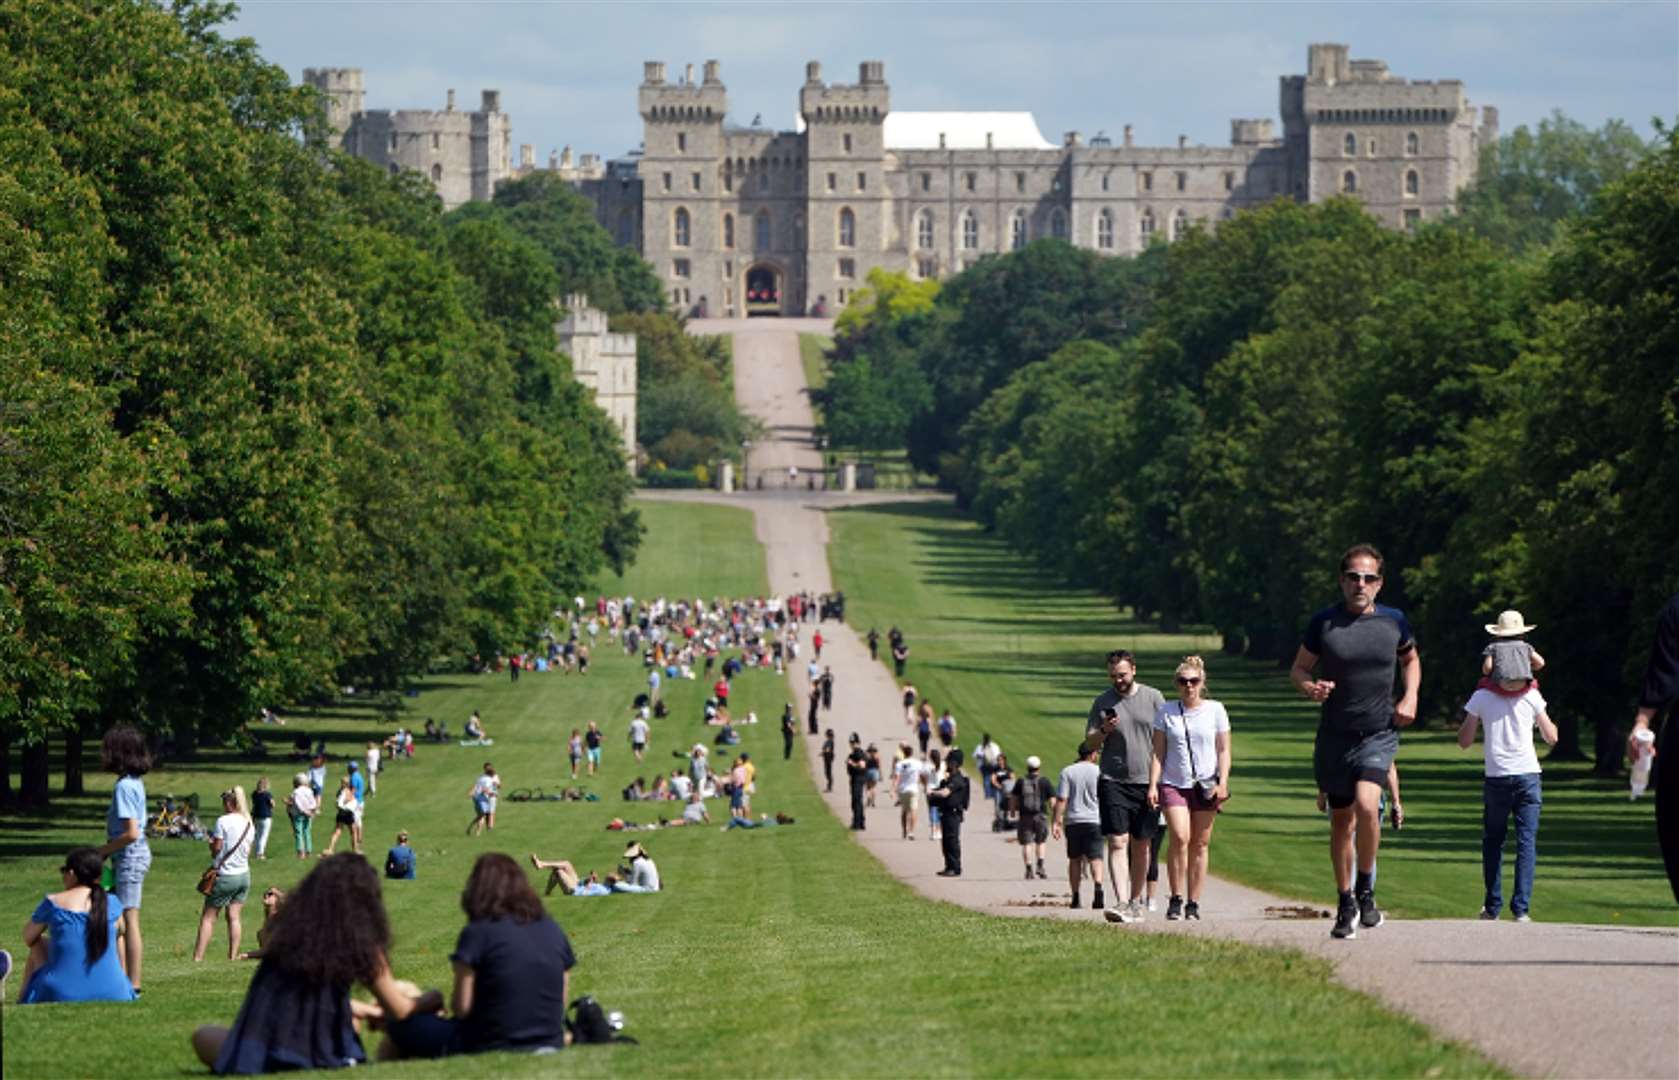 People make their way along the Long Walk in Windsor (Andrew Matthews/PA Images)